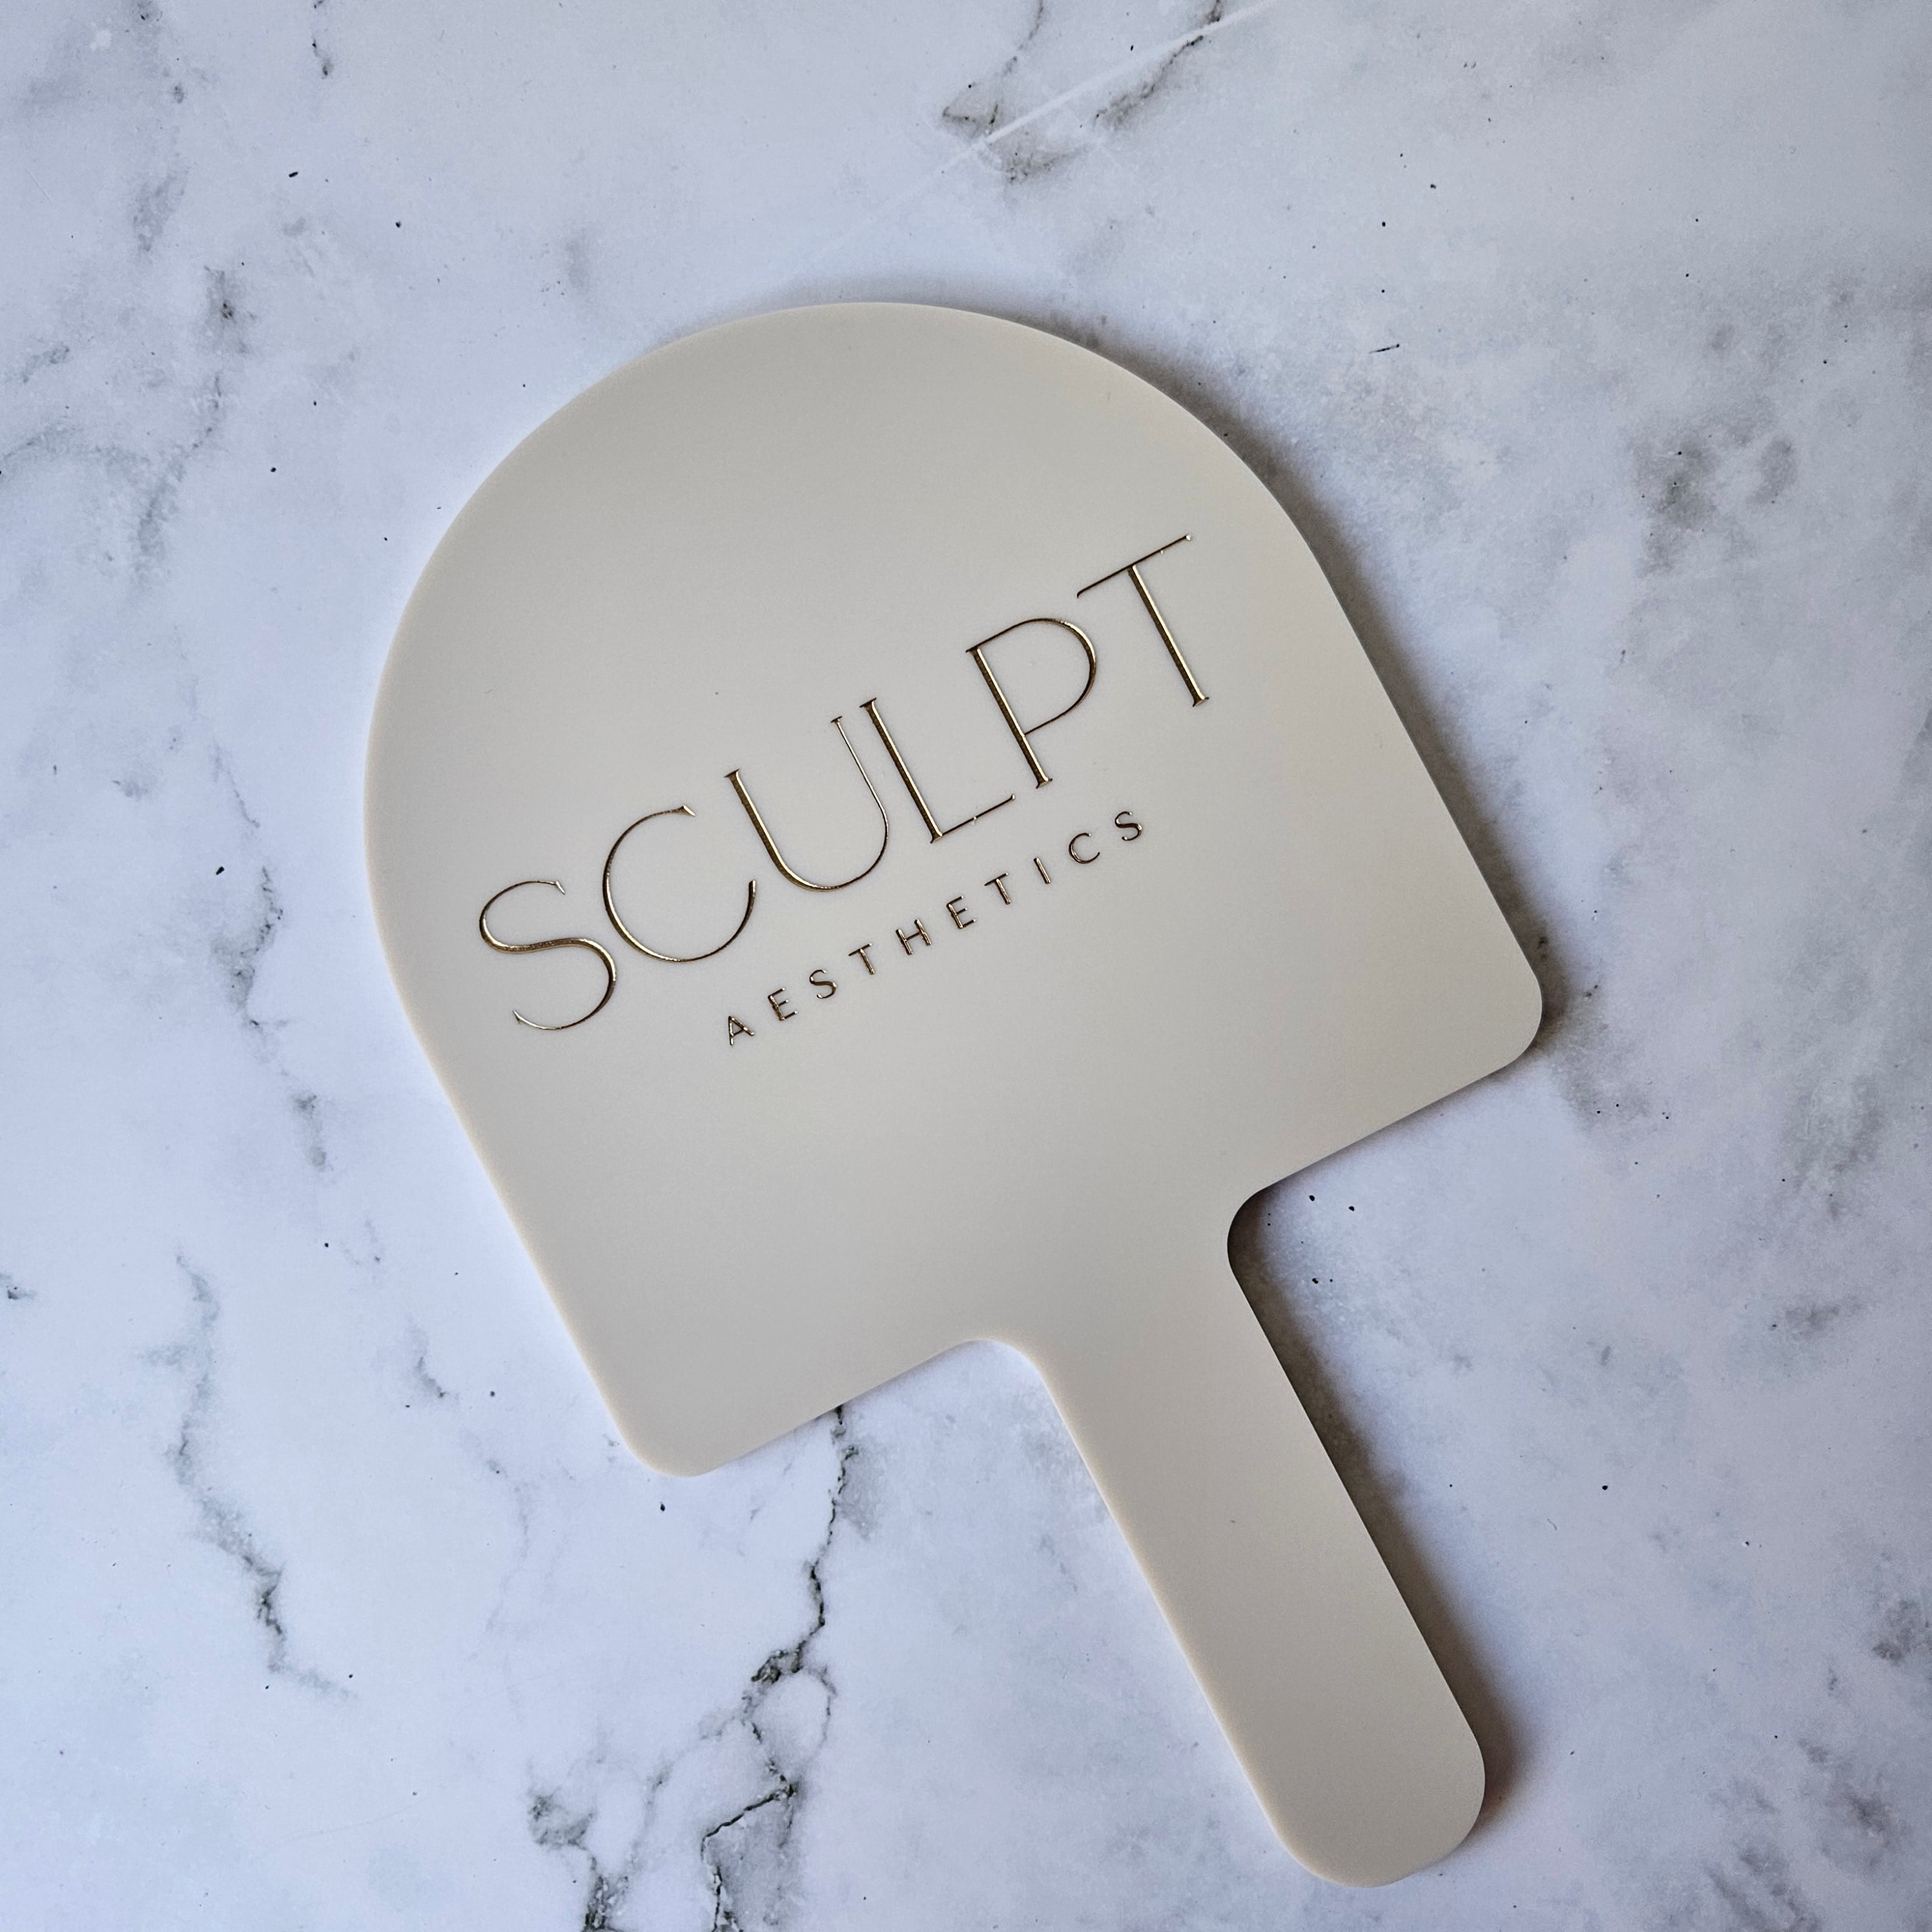 Custom Handheld Mirror with Logo for Injectable Clinic - Arch handheld mirror in beige acrylic with Gold logo